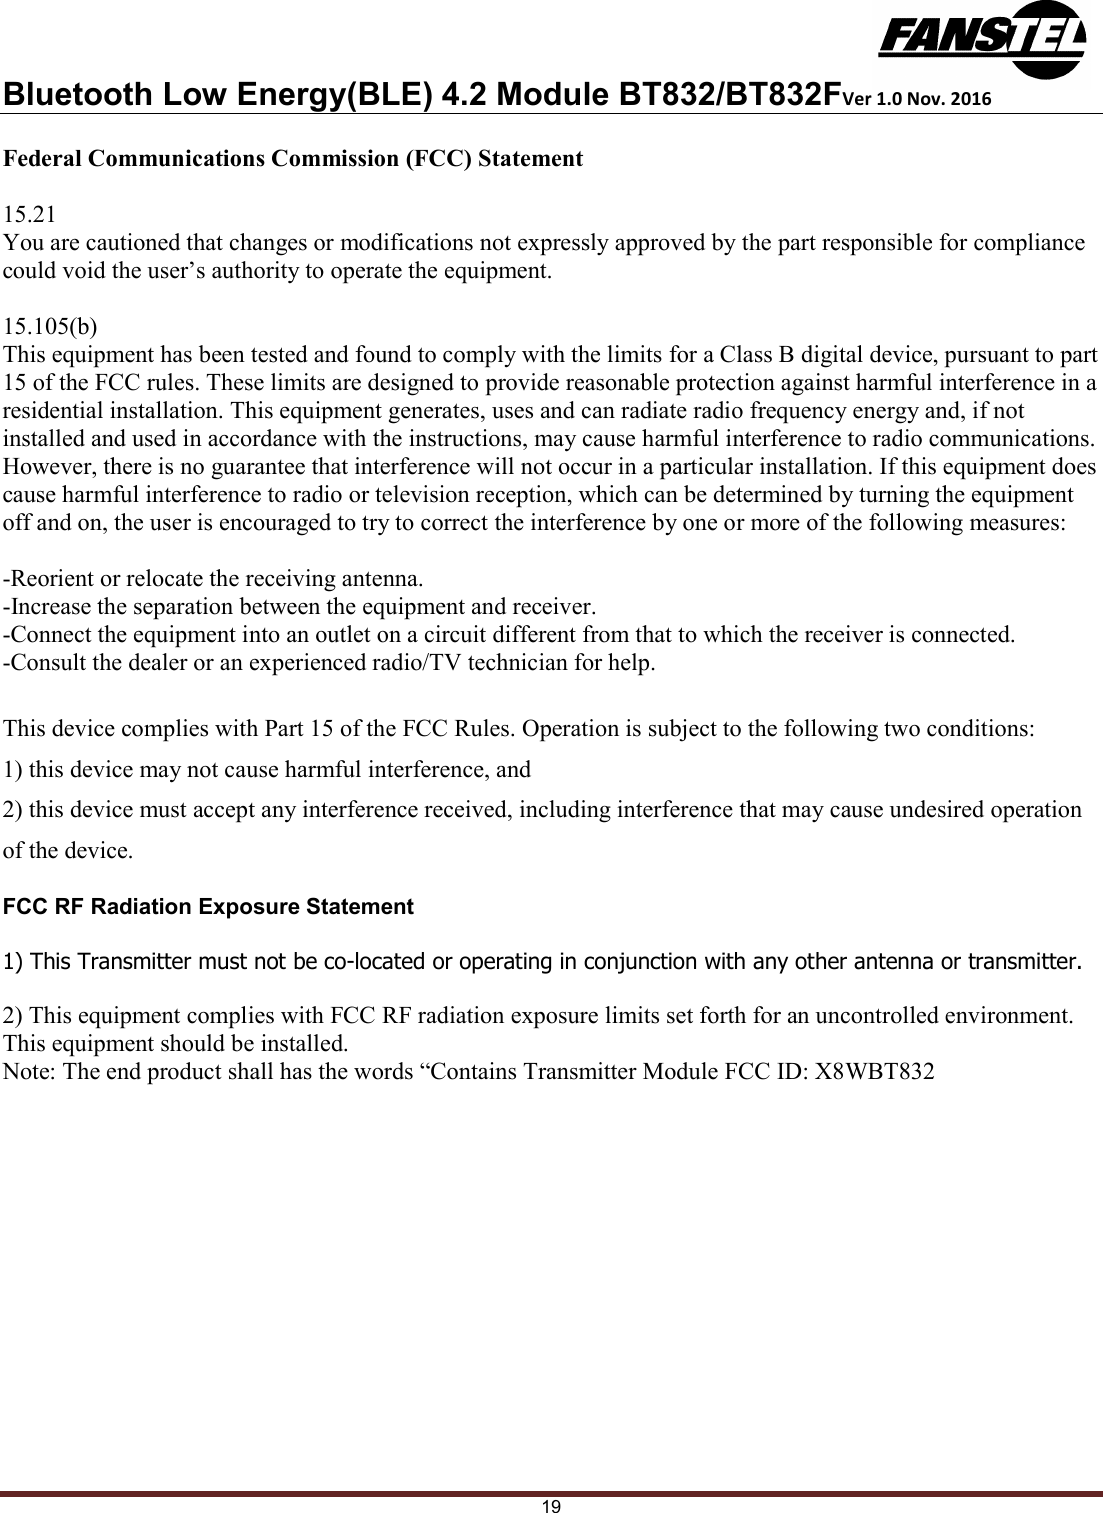 Bluetooth Low Energy(BLE) 4.2 Module BT832/BT832FVer 1.0 Nov. 2016 19 Federal Communications Commission (FCC) Statement  15.21 You are cautioned that changes or modifications not expressly approved by the part responsible for compliance could void the user’s authority to operate the equipment.  15.105(b) This equipment has been tested and found to comply with the limits for a Class B digital device, pursuant to part 15 of the FCC rules. These limits are designed to provide reasonable protection against harmful interference in a residential installation. This equipment generates, uses and can radiate radio frequency energy and, if not installed and used in accordance with the instructions, may cause harmful interference to radio communications. However, there is no guarantee that interference will not occur in a particular installation. If this equipment does cause harmful interference to radio or television reception, which can be determined by turning the equipment off and on, the user is encouraged to try to correct the interference by one or more of the following measures:  -Reorient or relocate the receiving antenna. -Increase the separation between the equipment and receiver. -Connect the equipment into an outlet on a circuit different from that to which the receiver is connected. -Consult the dealer or an experienced radio/TV technician for help.  This device complies with Part 15 of the FCC Rules. Operation is subject to the following two conditions: 1) this device may not cause harmful interference, and 2) this device must accept any interference received, including interference that may cause undesired operation of the device.  FCC RF Radiation Exposure Statement  1) This Transmitter must not be co-located or operating in conjunction with any other antenna or transmitter.  2) This equipment complies with FCC RF radiation exposure limits set forth for an uncontrolled environment. This equipment should be installed.  Note: The end product shall has the words “Contains Transmitter Module FCC ID: X8WBT832    